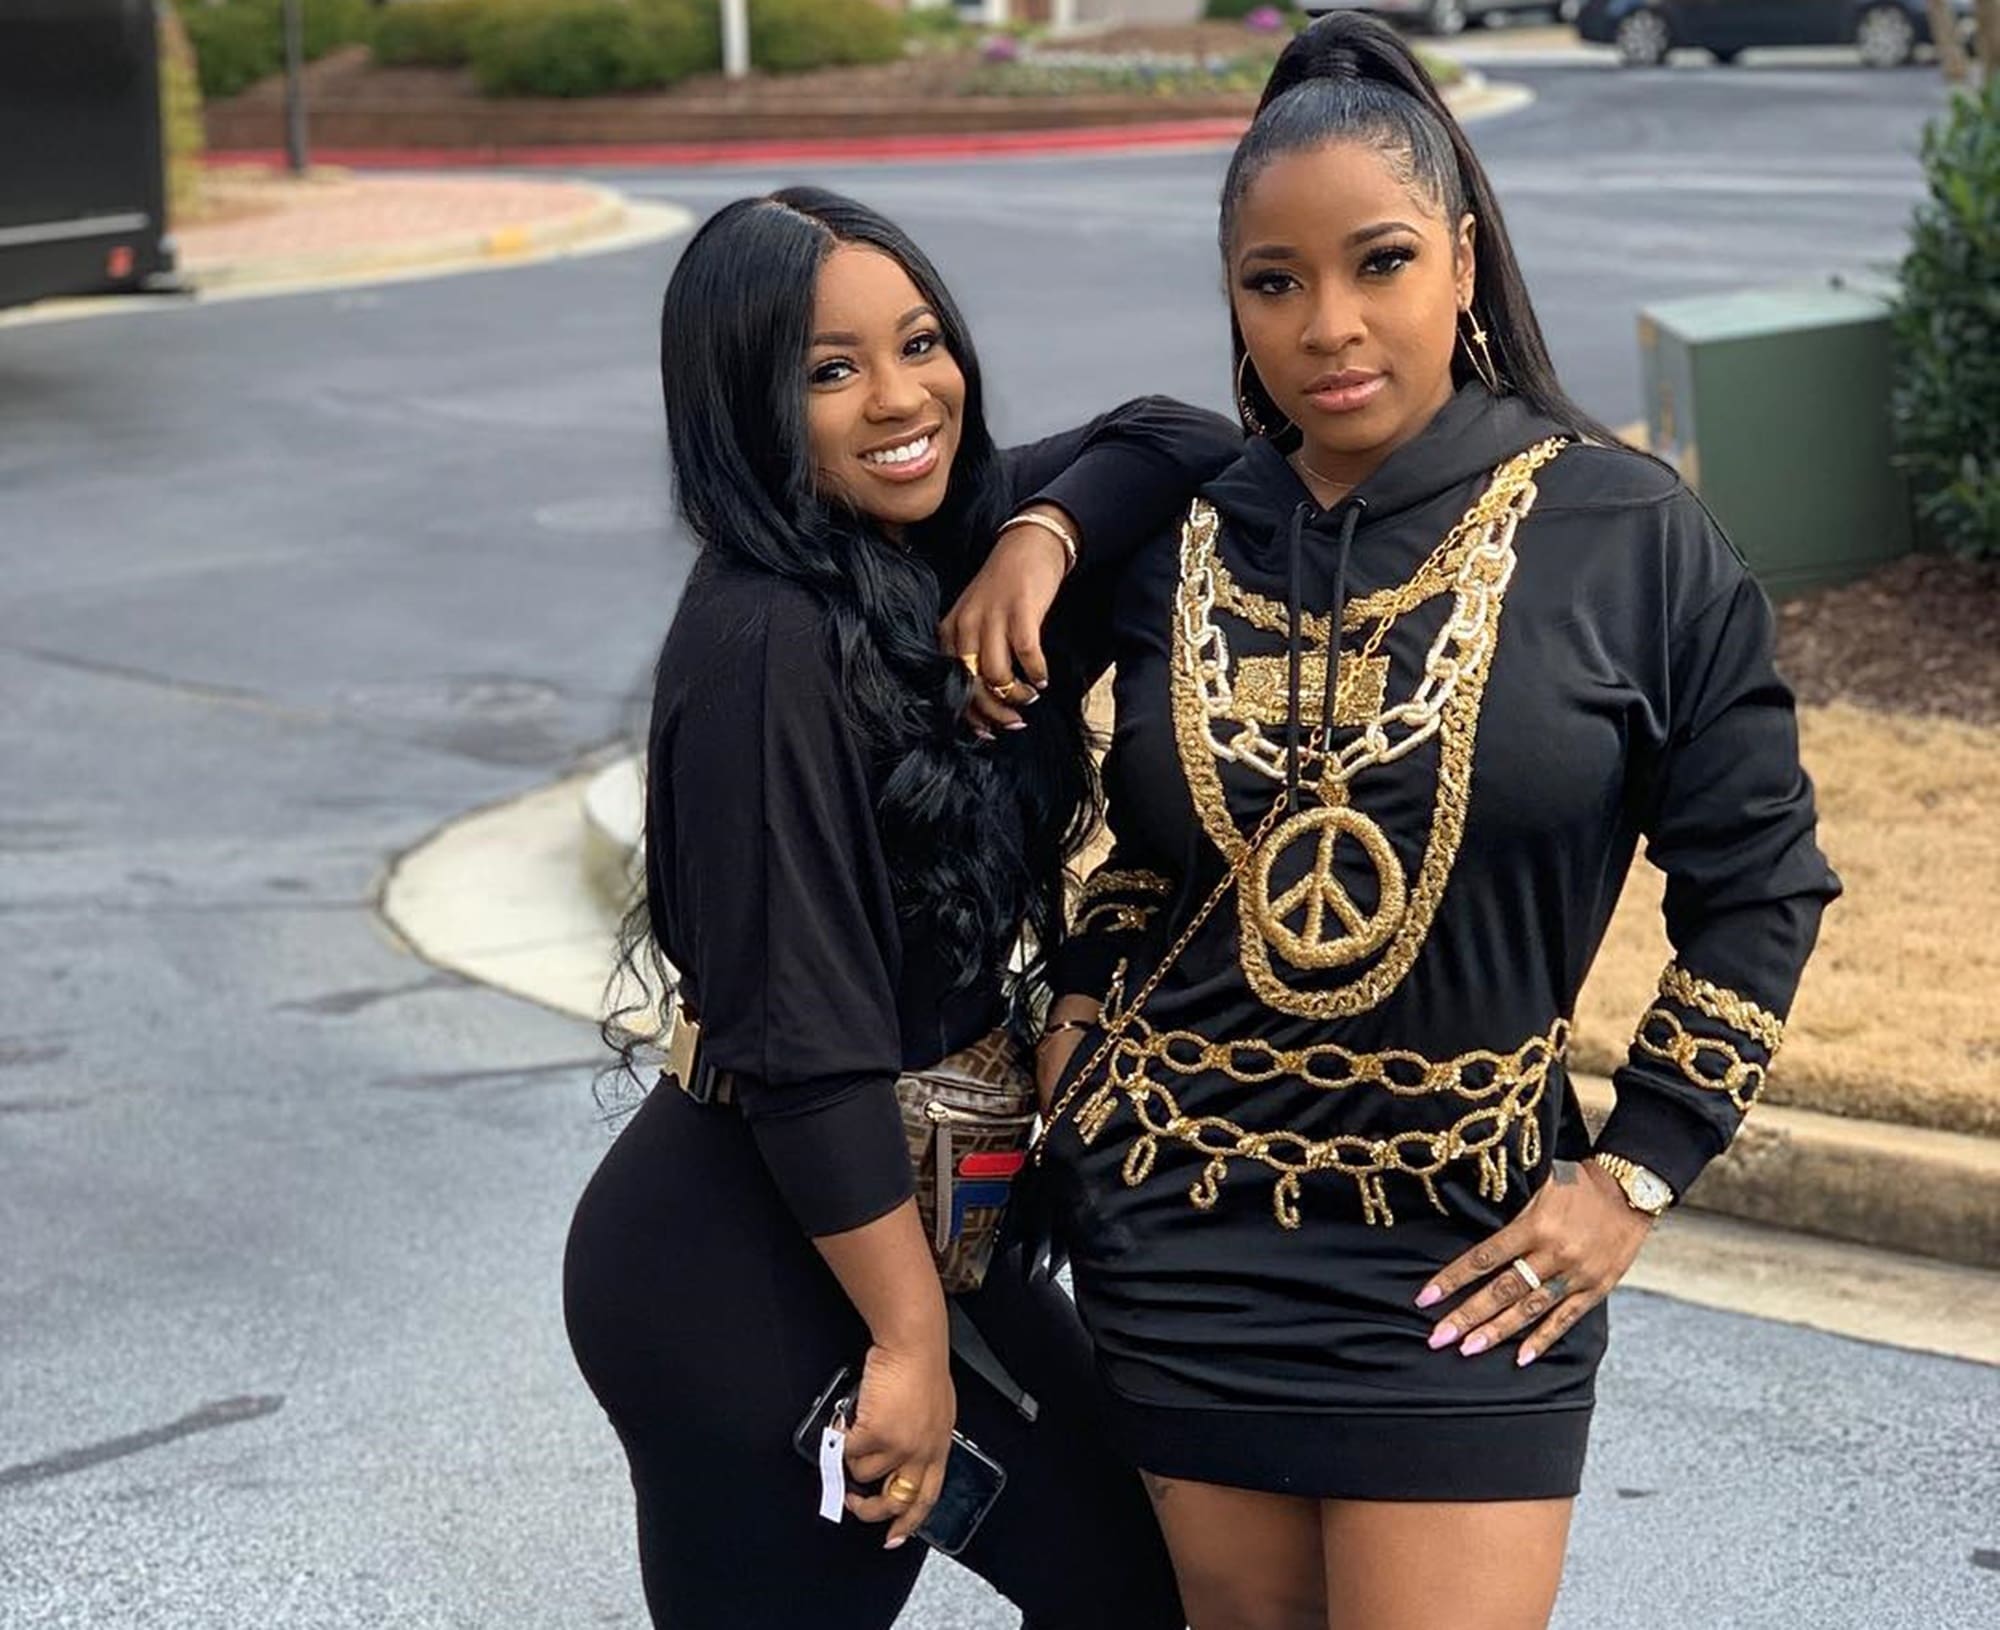 Reginae Carter Breaks Fans' Hearts With A Photo That Triggers Memories - Here It Is